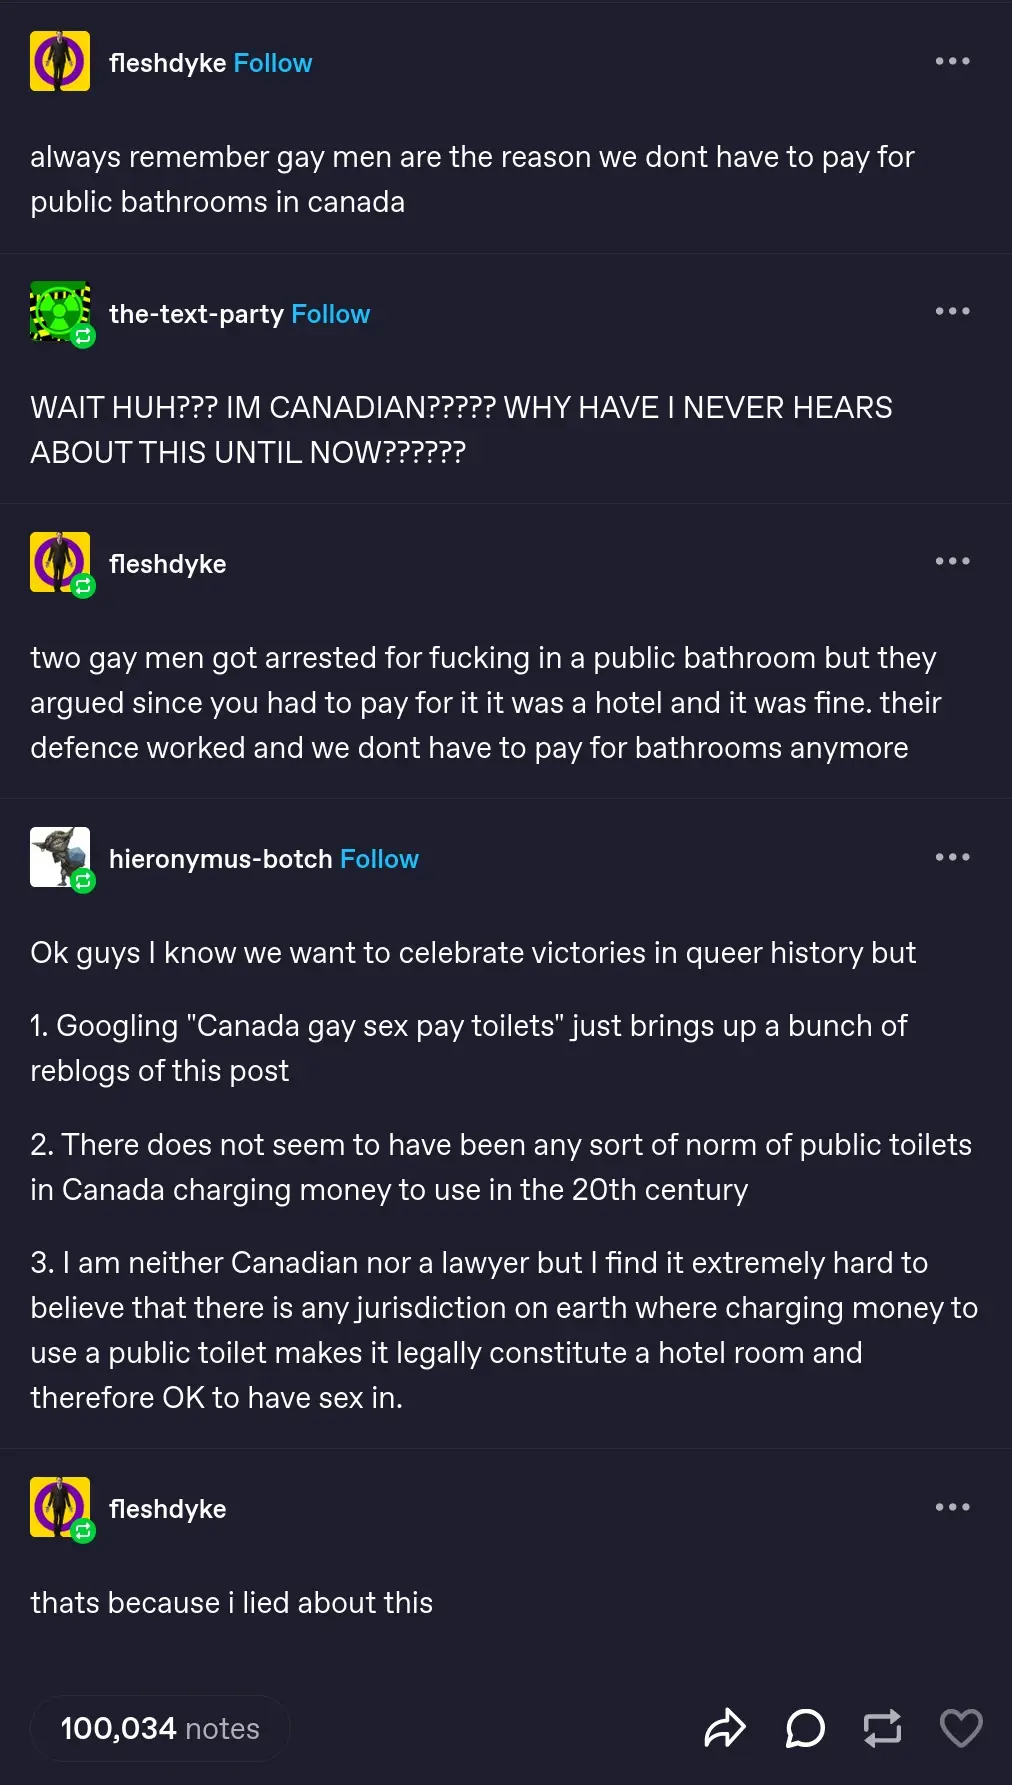 Tumblr post featuring multible users conversing. fleshdyke: "always remember gay men are the reason we dont have to pay for public bathrooms in canada" the-text-party: "WAIT HUH??? IM CANADIAN????? WHY HAVE I NEVER HEARS ABOUT THIS UNTIL NOW??????" fleshdyke: "two gay men got arrested for fucking in a public bathroom but they argued since you had to pay for it it was a hotel and it was fine. their defence worked and we dont have to pay for bathrooms anymore" hieronymus-botch: "Ok guys I know we want to celebrate victories in queer history but  1. Googling "Canada gay sex pay toilets" just brings up a bunch of reblogs of this post  2. There does not seem to have been any sort of norm of public toilets in Canada charging money to use in the 20th century  3. I am neither Canadian nor a lawyer but I find it extremely hard to believe that there is any jurisdiction on earth where charging money to use a public toilet makes it legally constitute a hotel room and therefore OK to have sex in." fleshdyke: "thats because i lied about this" 100,034 notes